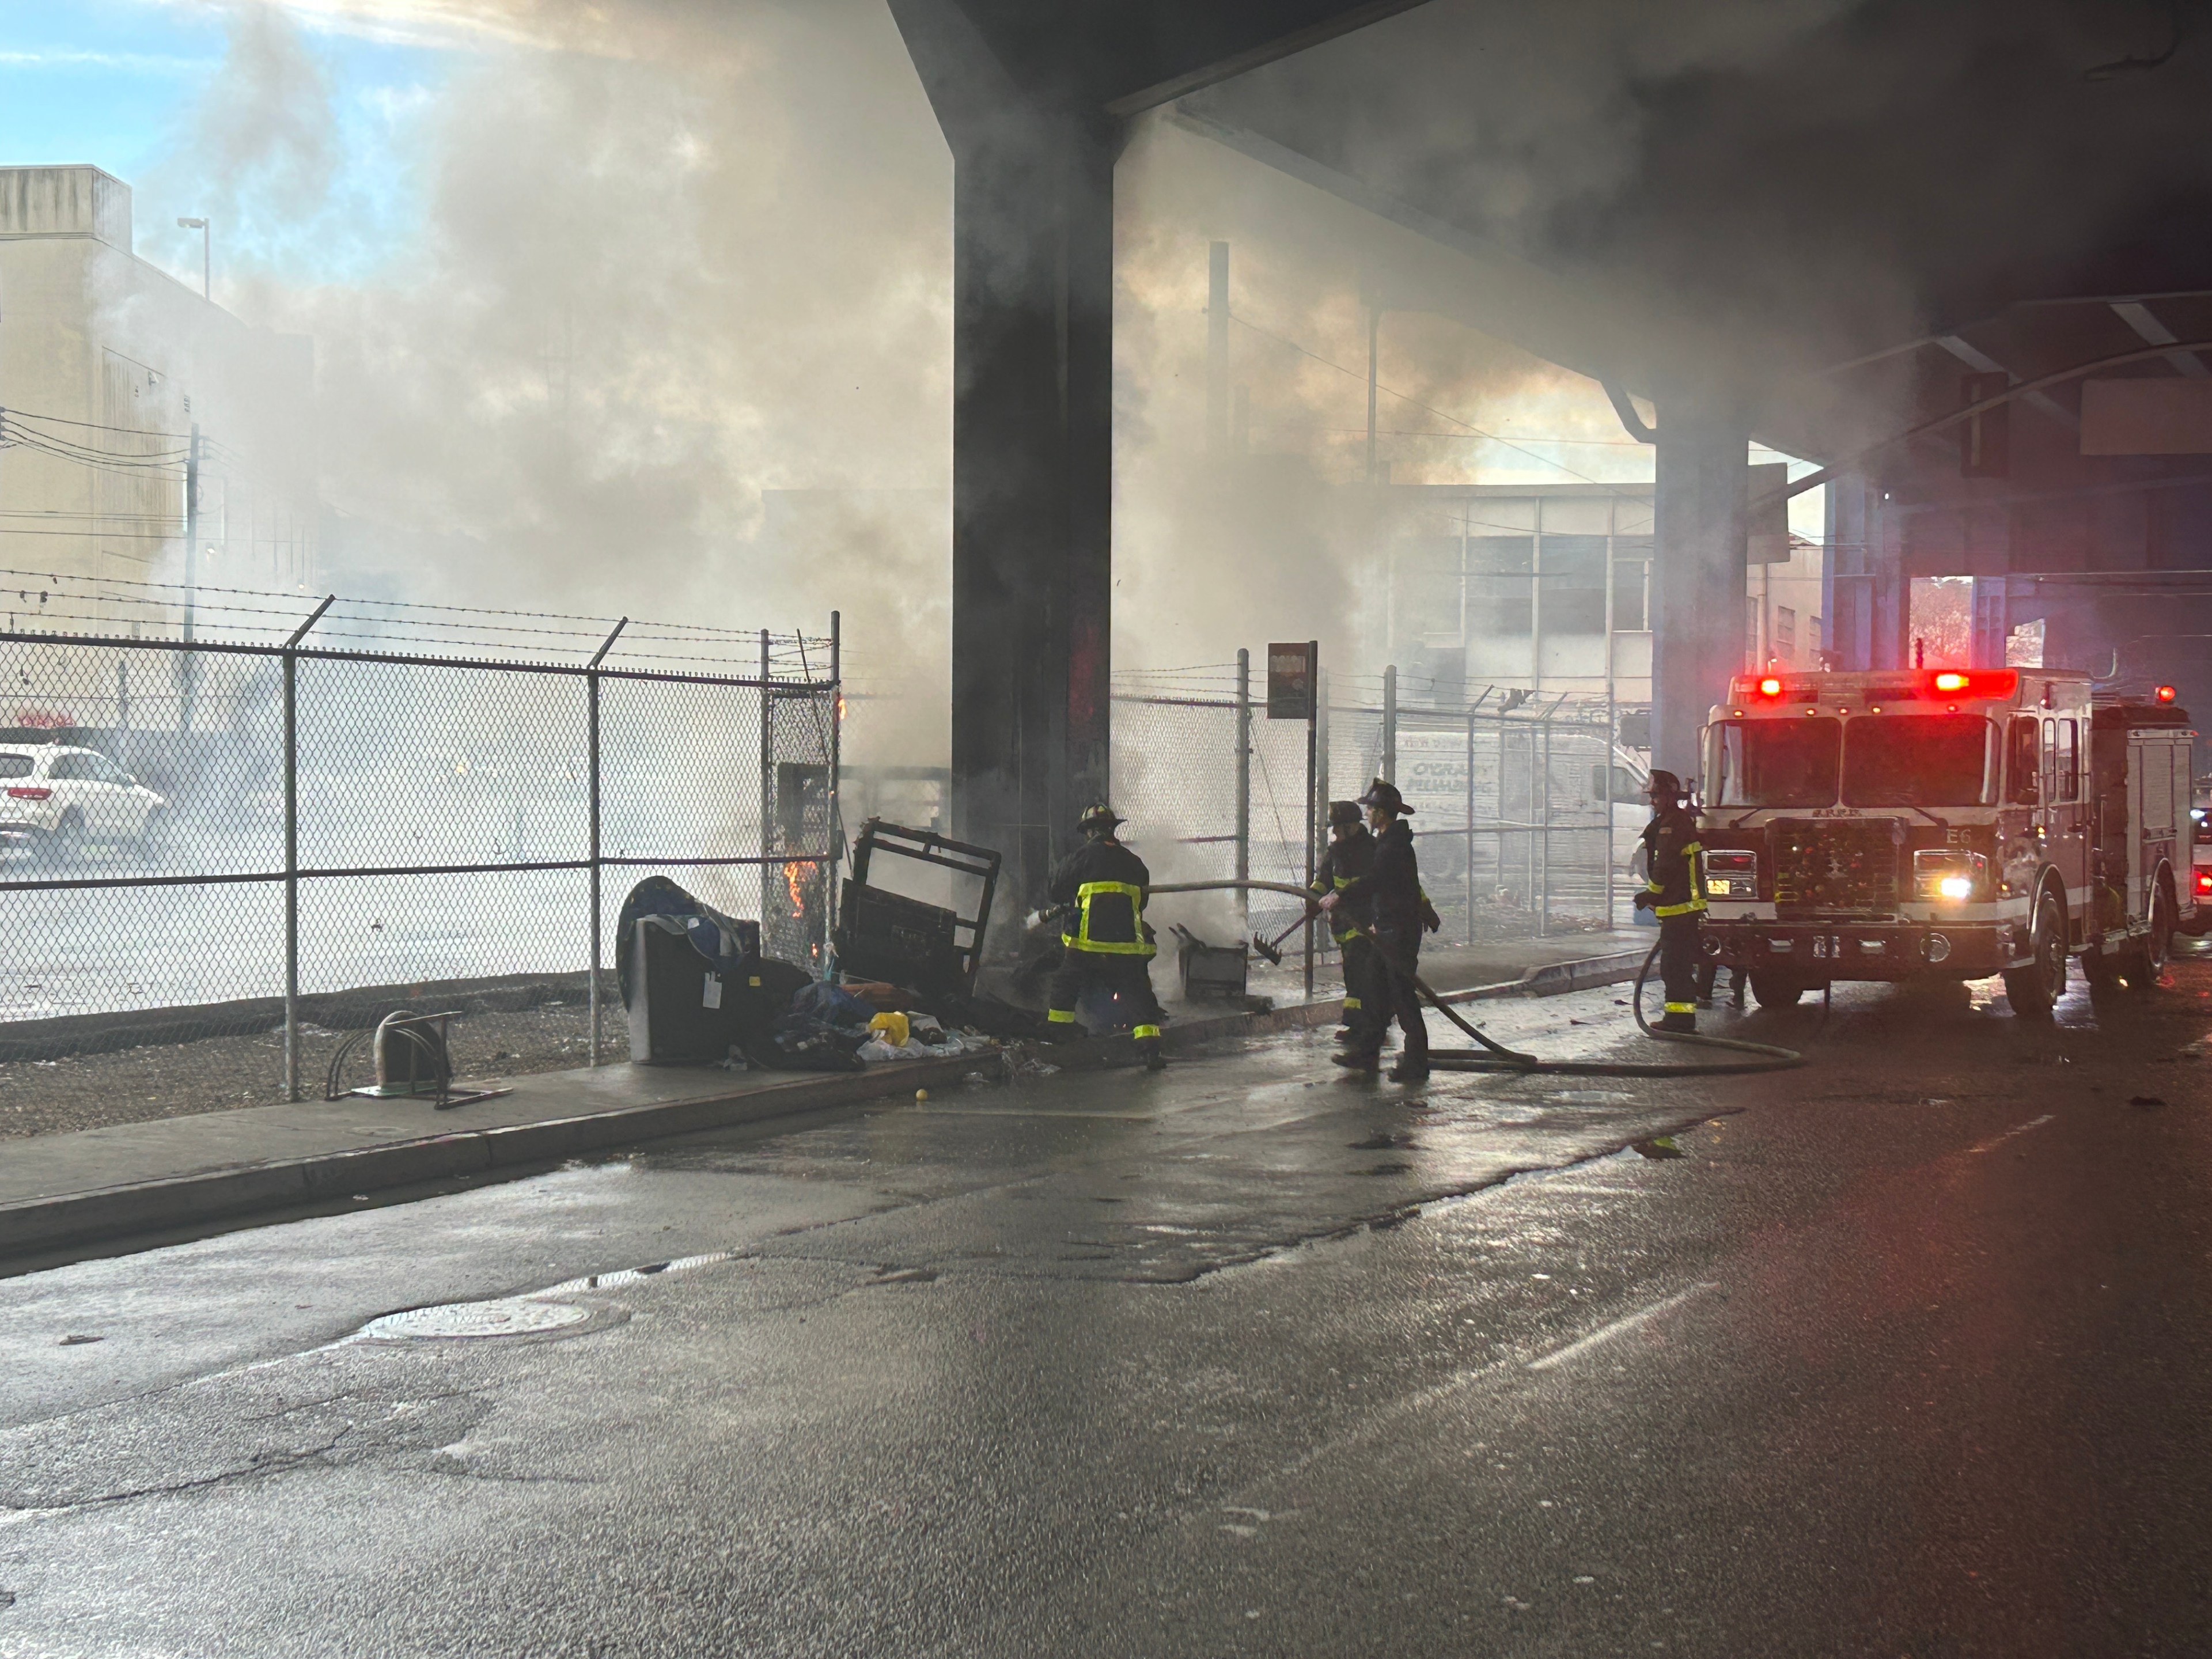 Firefighters spray water on a fire at the base of an elevated freeway support pillar.